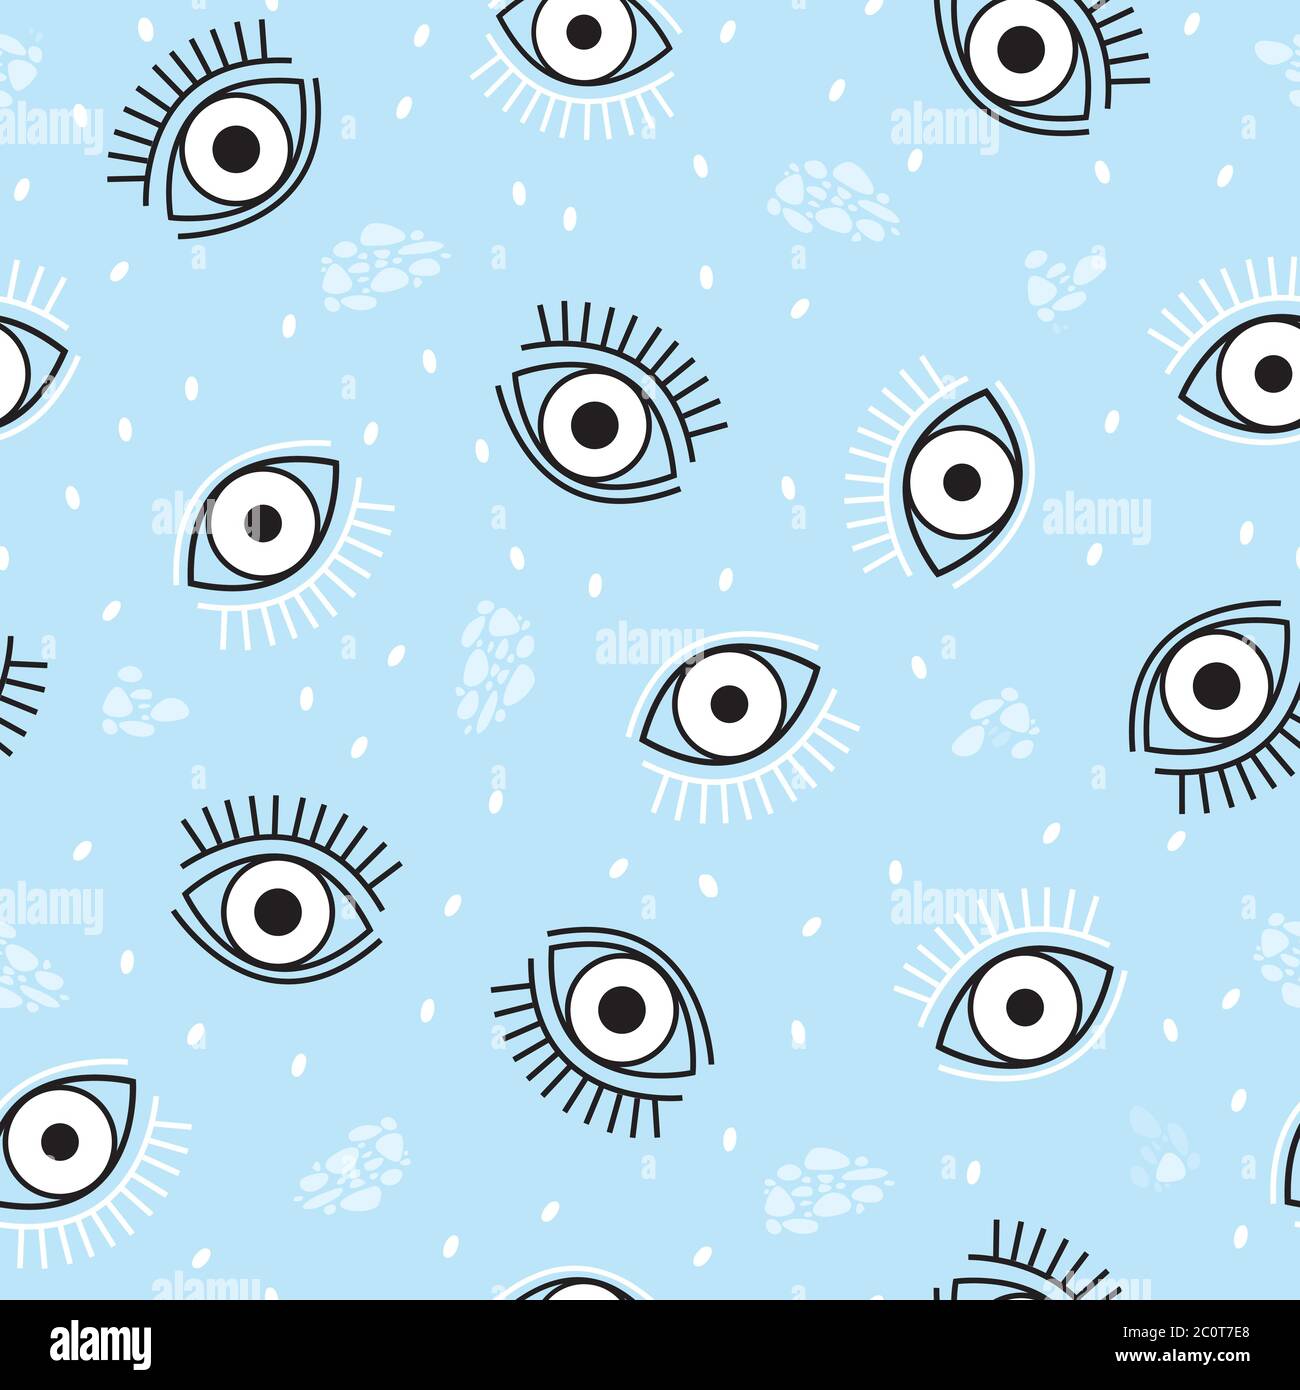 Seamless repeat pattern with white and black eyes and white dots.Perfect for textile, wallpaper and interior design. Stock Vector